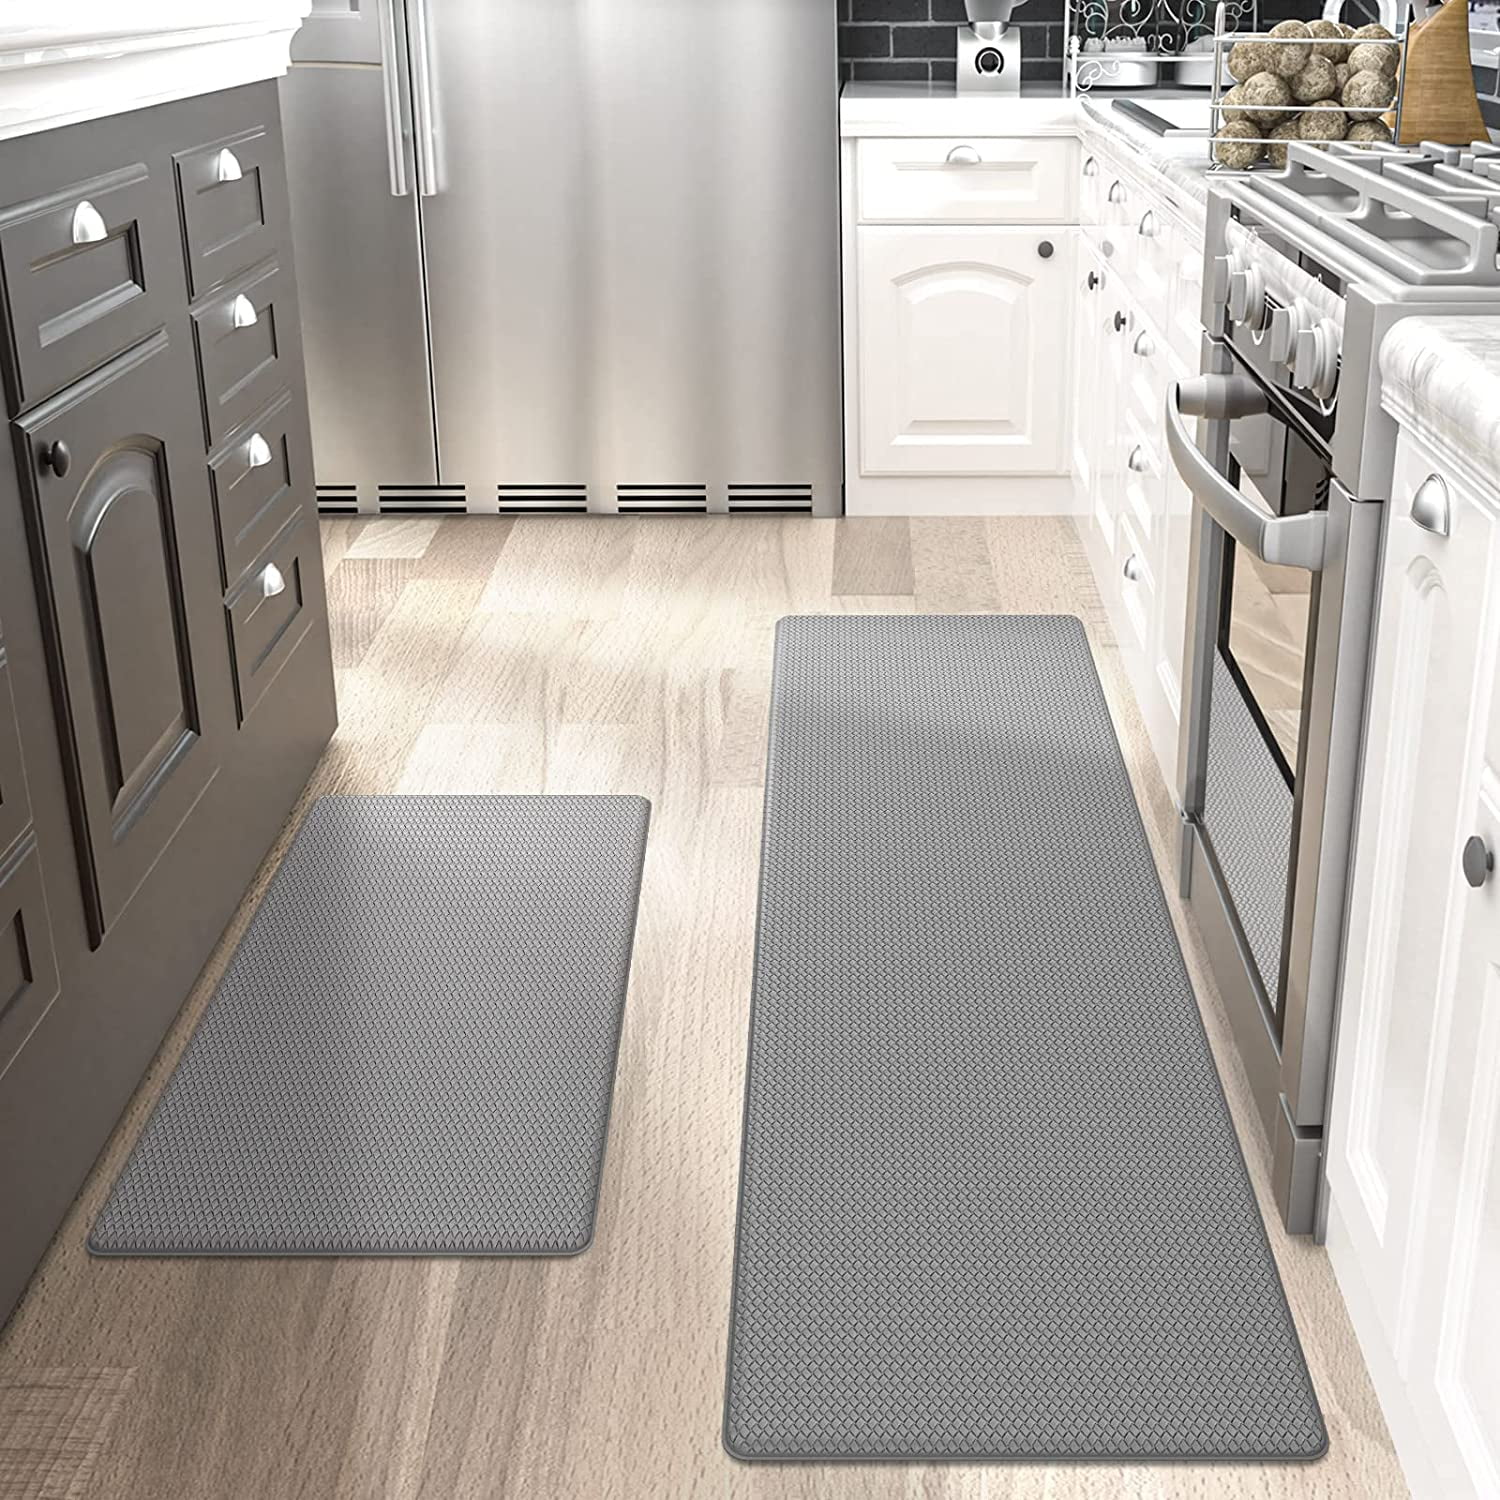  Comfort Anti Fatigue Standing Mats for Kitchen Floor, TEMASH  Cushioned Floor Rugs Non Slip, 2 Pieces Set for Home, Kitchen, Office, Sink  (White Marble) : Home & Kitchen